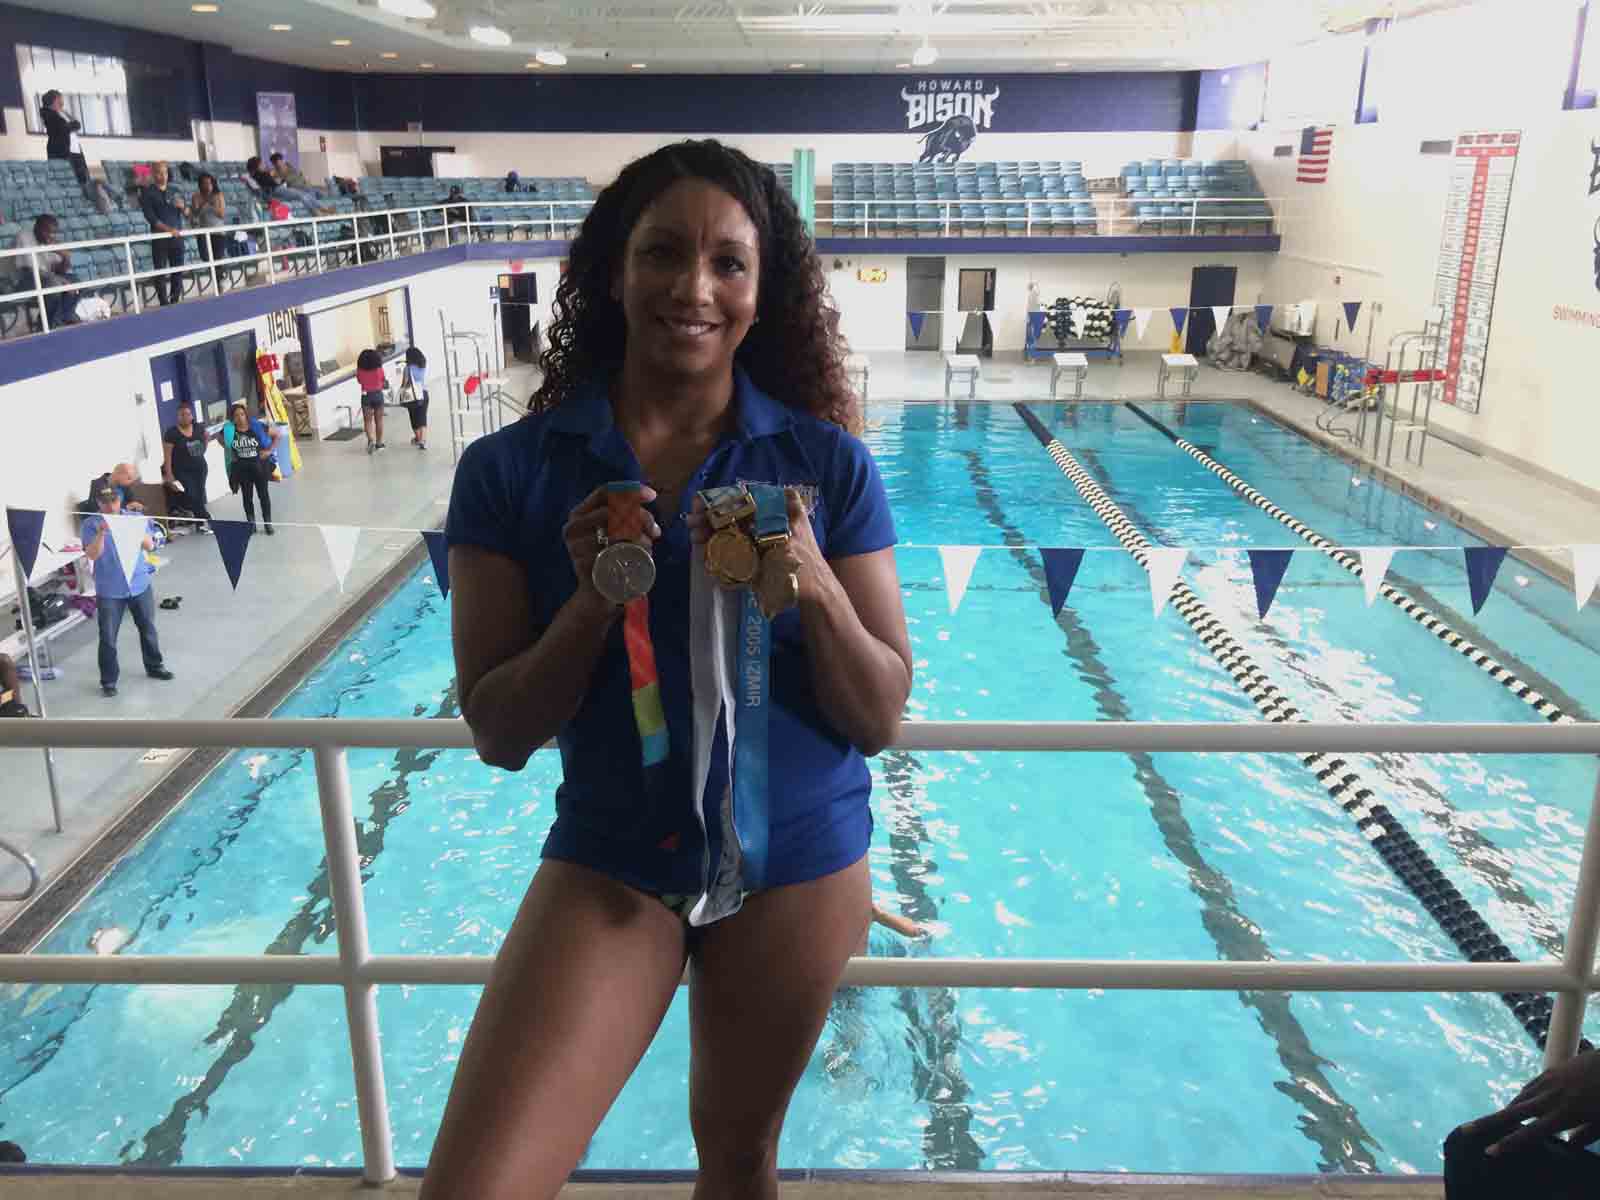 Maritza McClendon is the first female African-American swimmer to earn a spot on the U.S. Olympic team. She won a silver medal as part of the 400m free relay team at the 2004 Athens Games. (WTOP/Dick Uliano) 